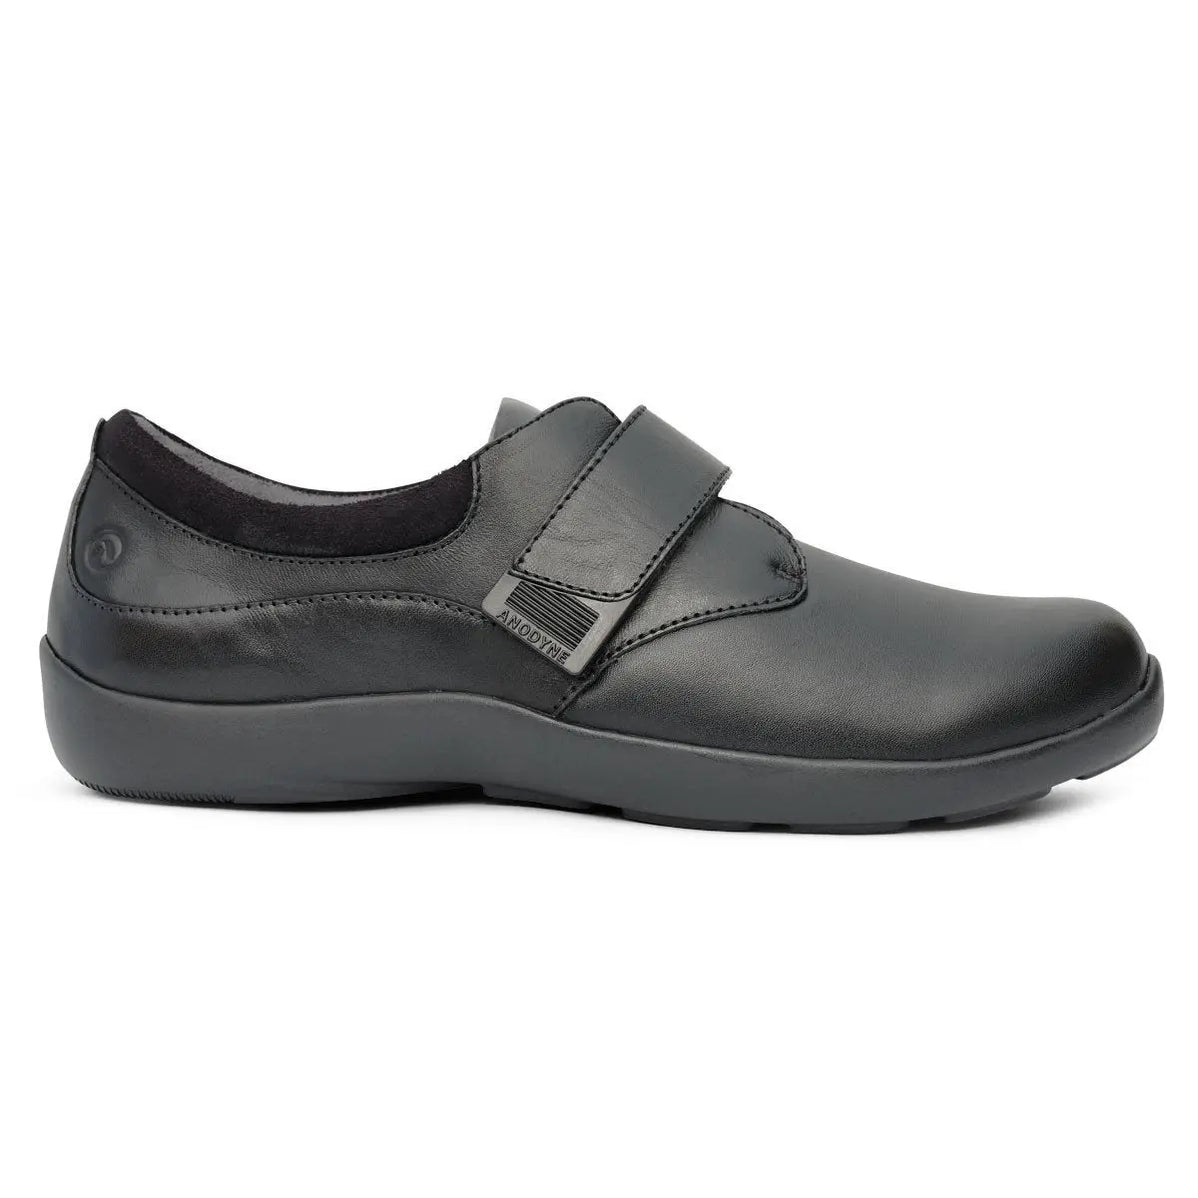 Therapeutic & Diabetic Shoes | Dahl Medical Supply